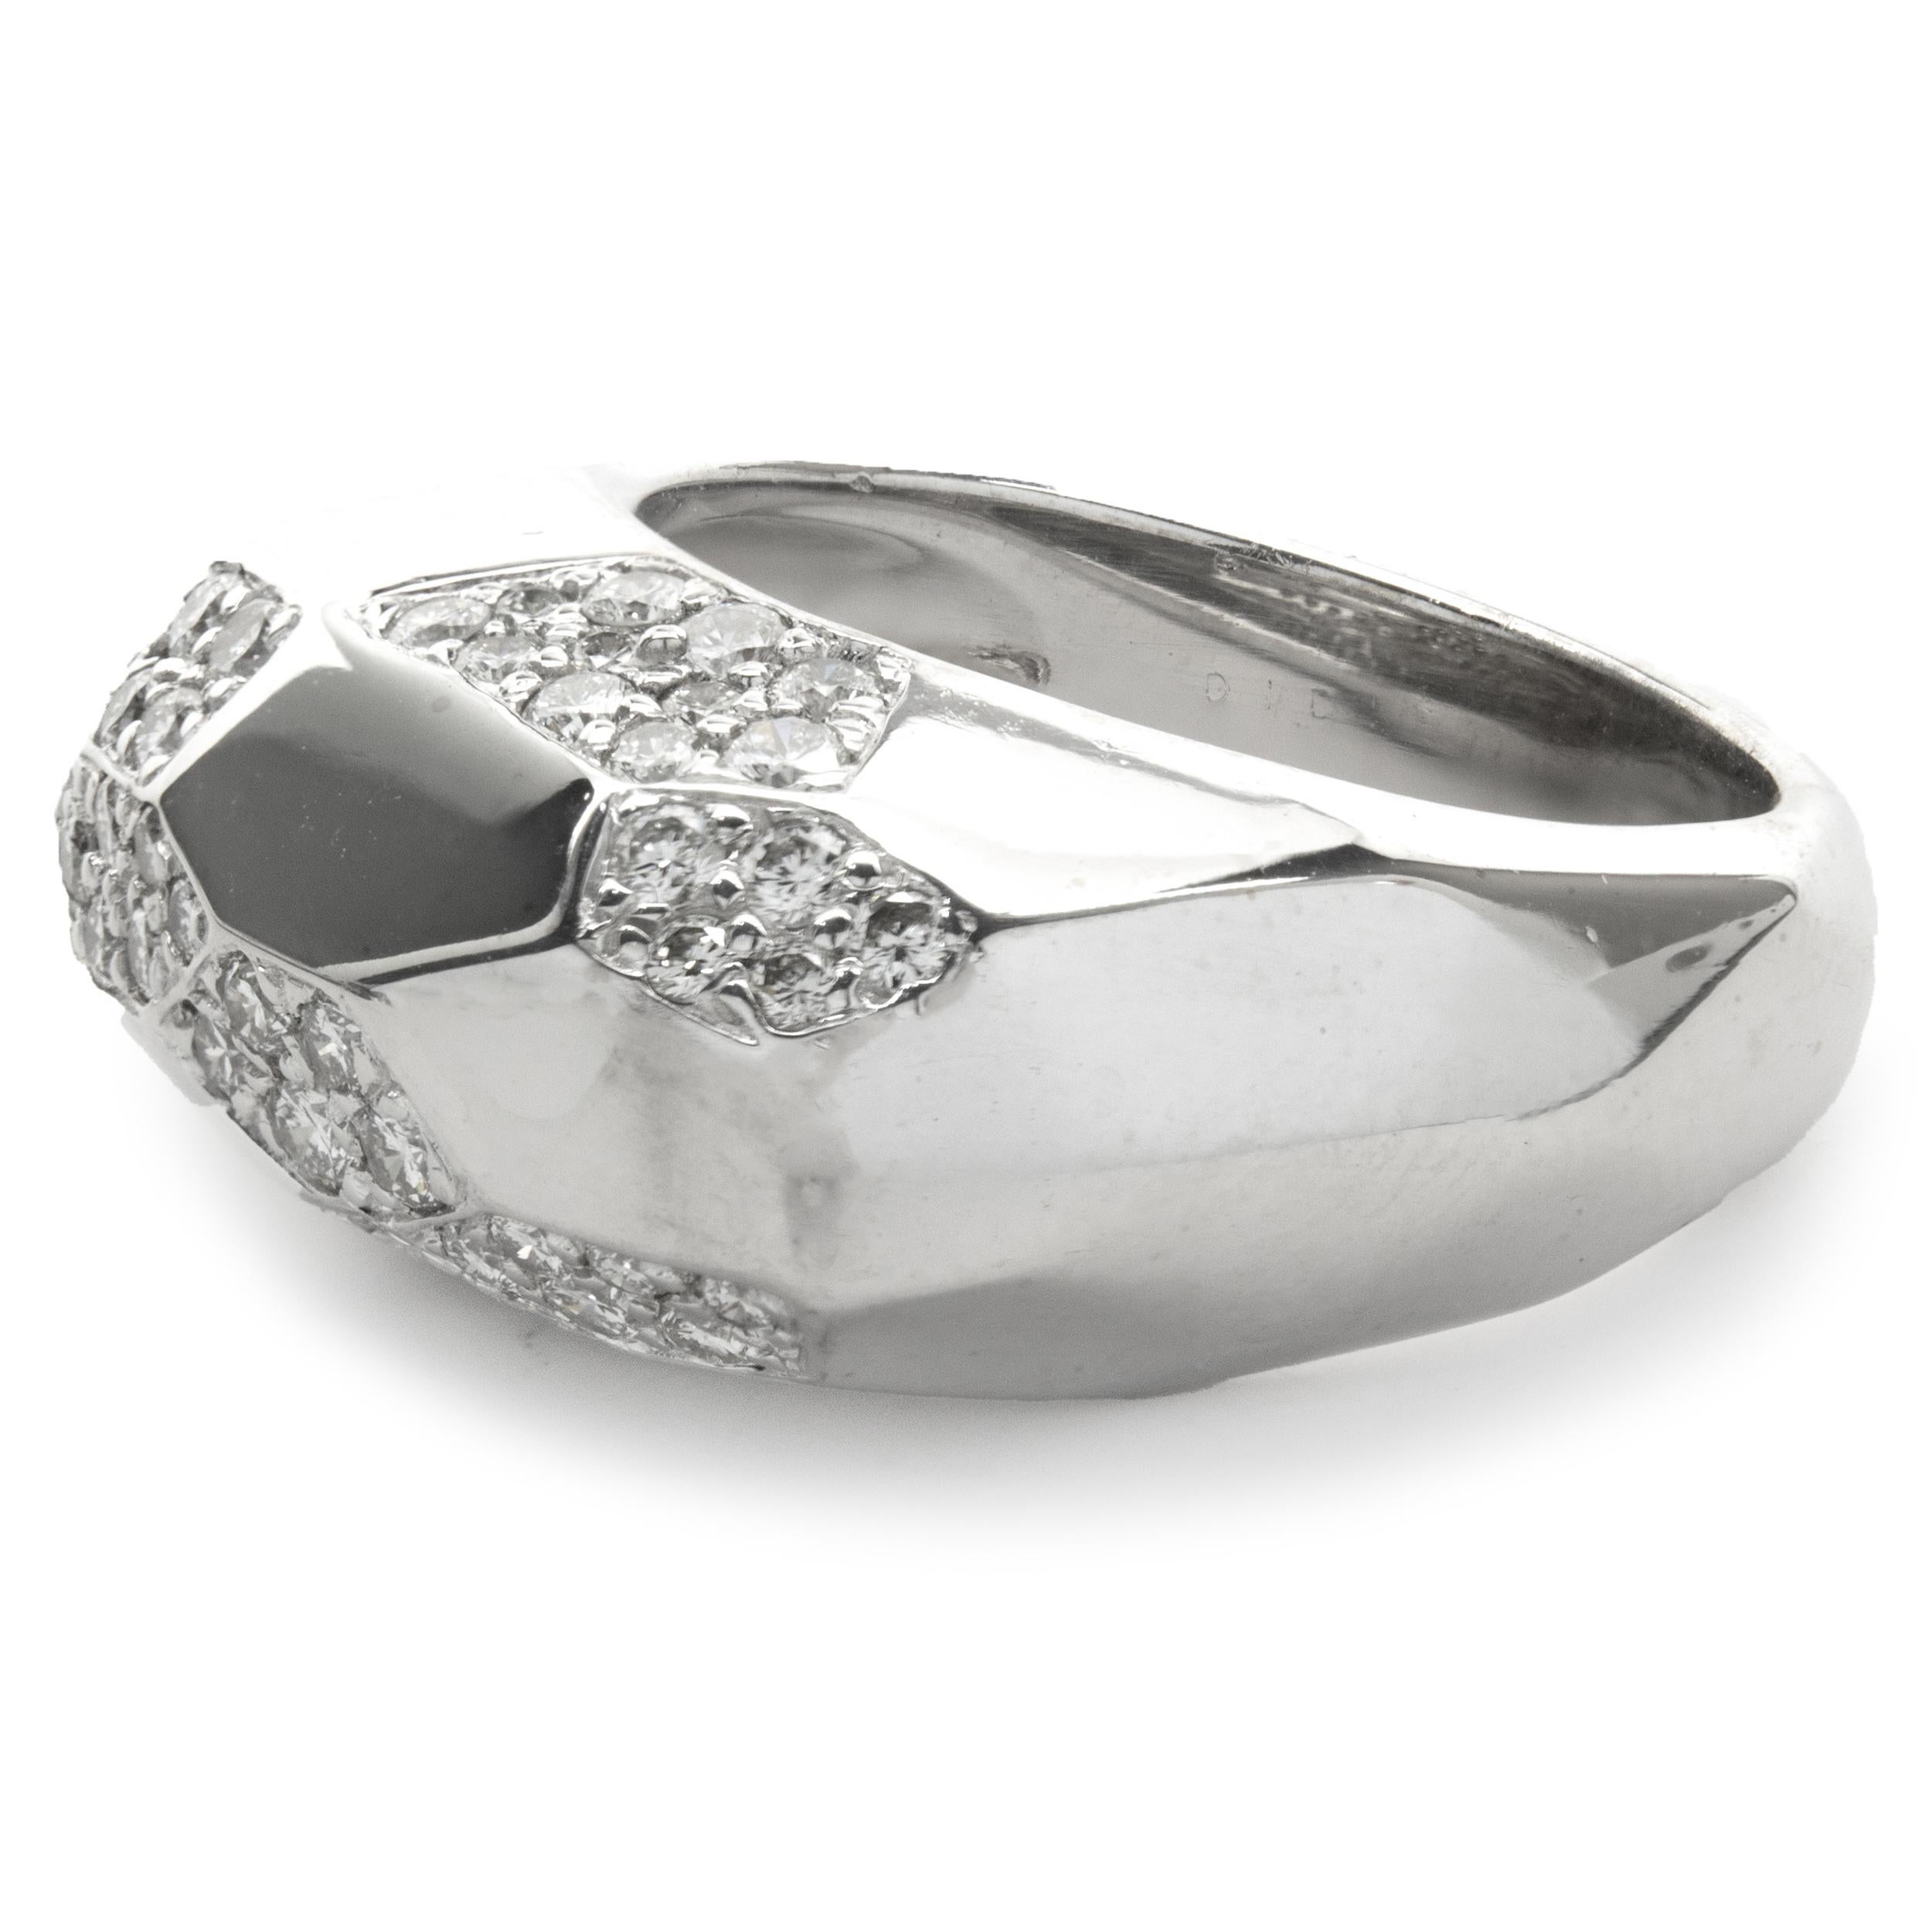 Designer: Didier Guerin
Material: platinum
Diamond: 48 round brilliant cut= .96cttw
Color: G
Clarity: VS1
Ring Size: 7 (please allow two additional shipping days for sizing requests)
Dimensions: ring top measures 10.16 X 23.23mm
Weight: 14.7 grams
